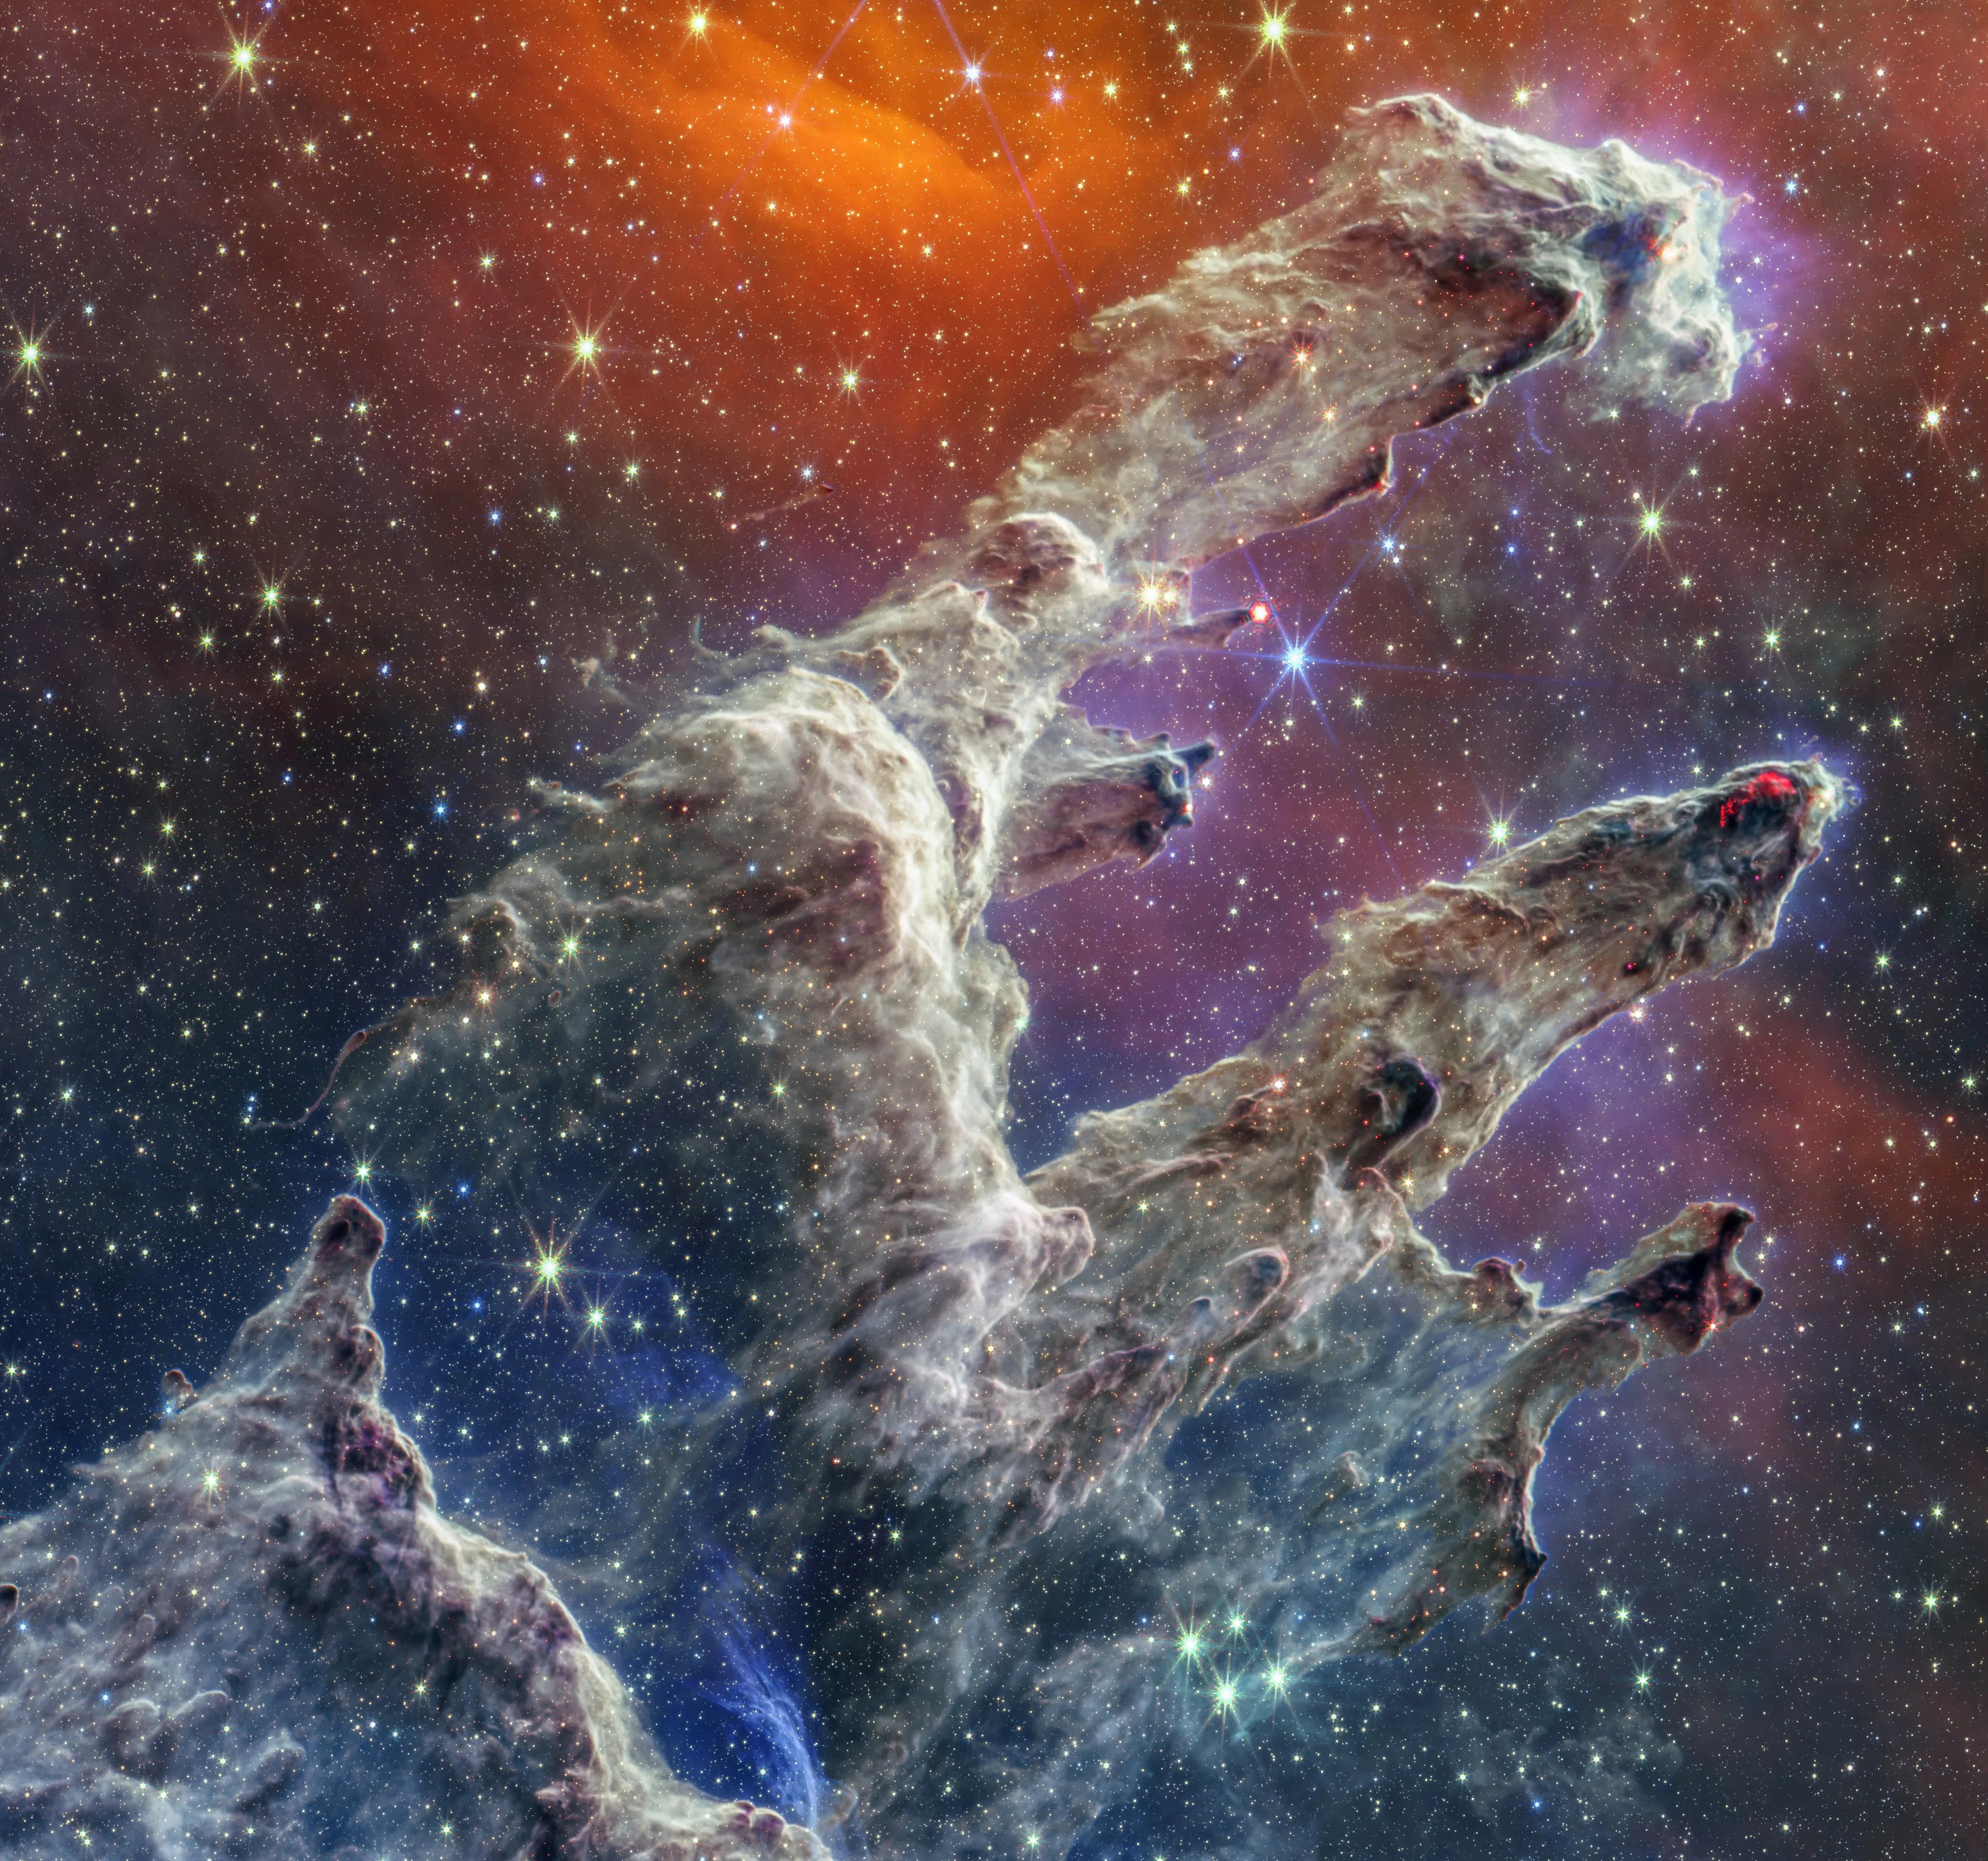 Image of the Pillars of Creation